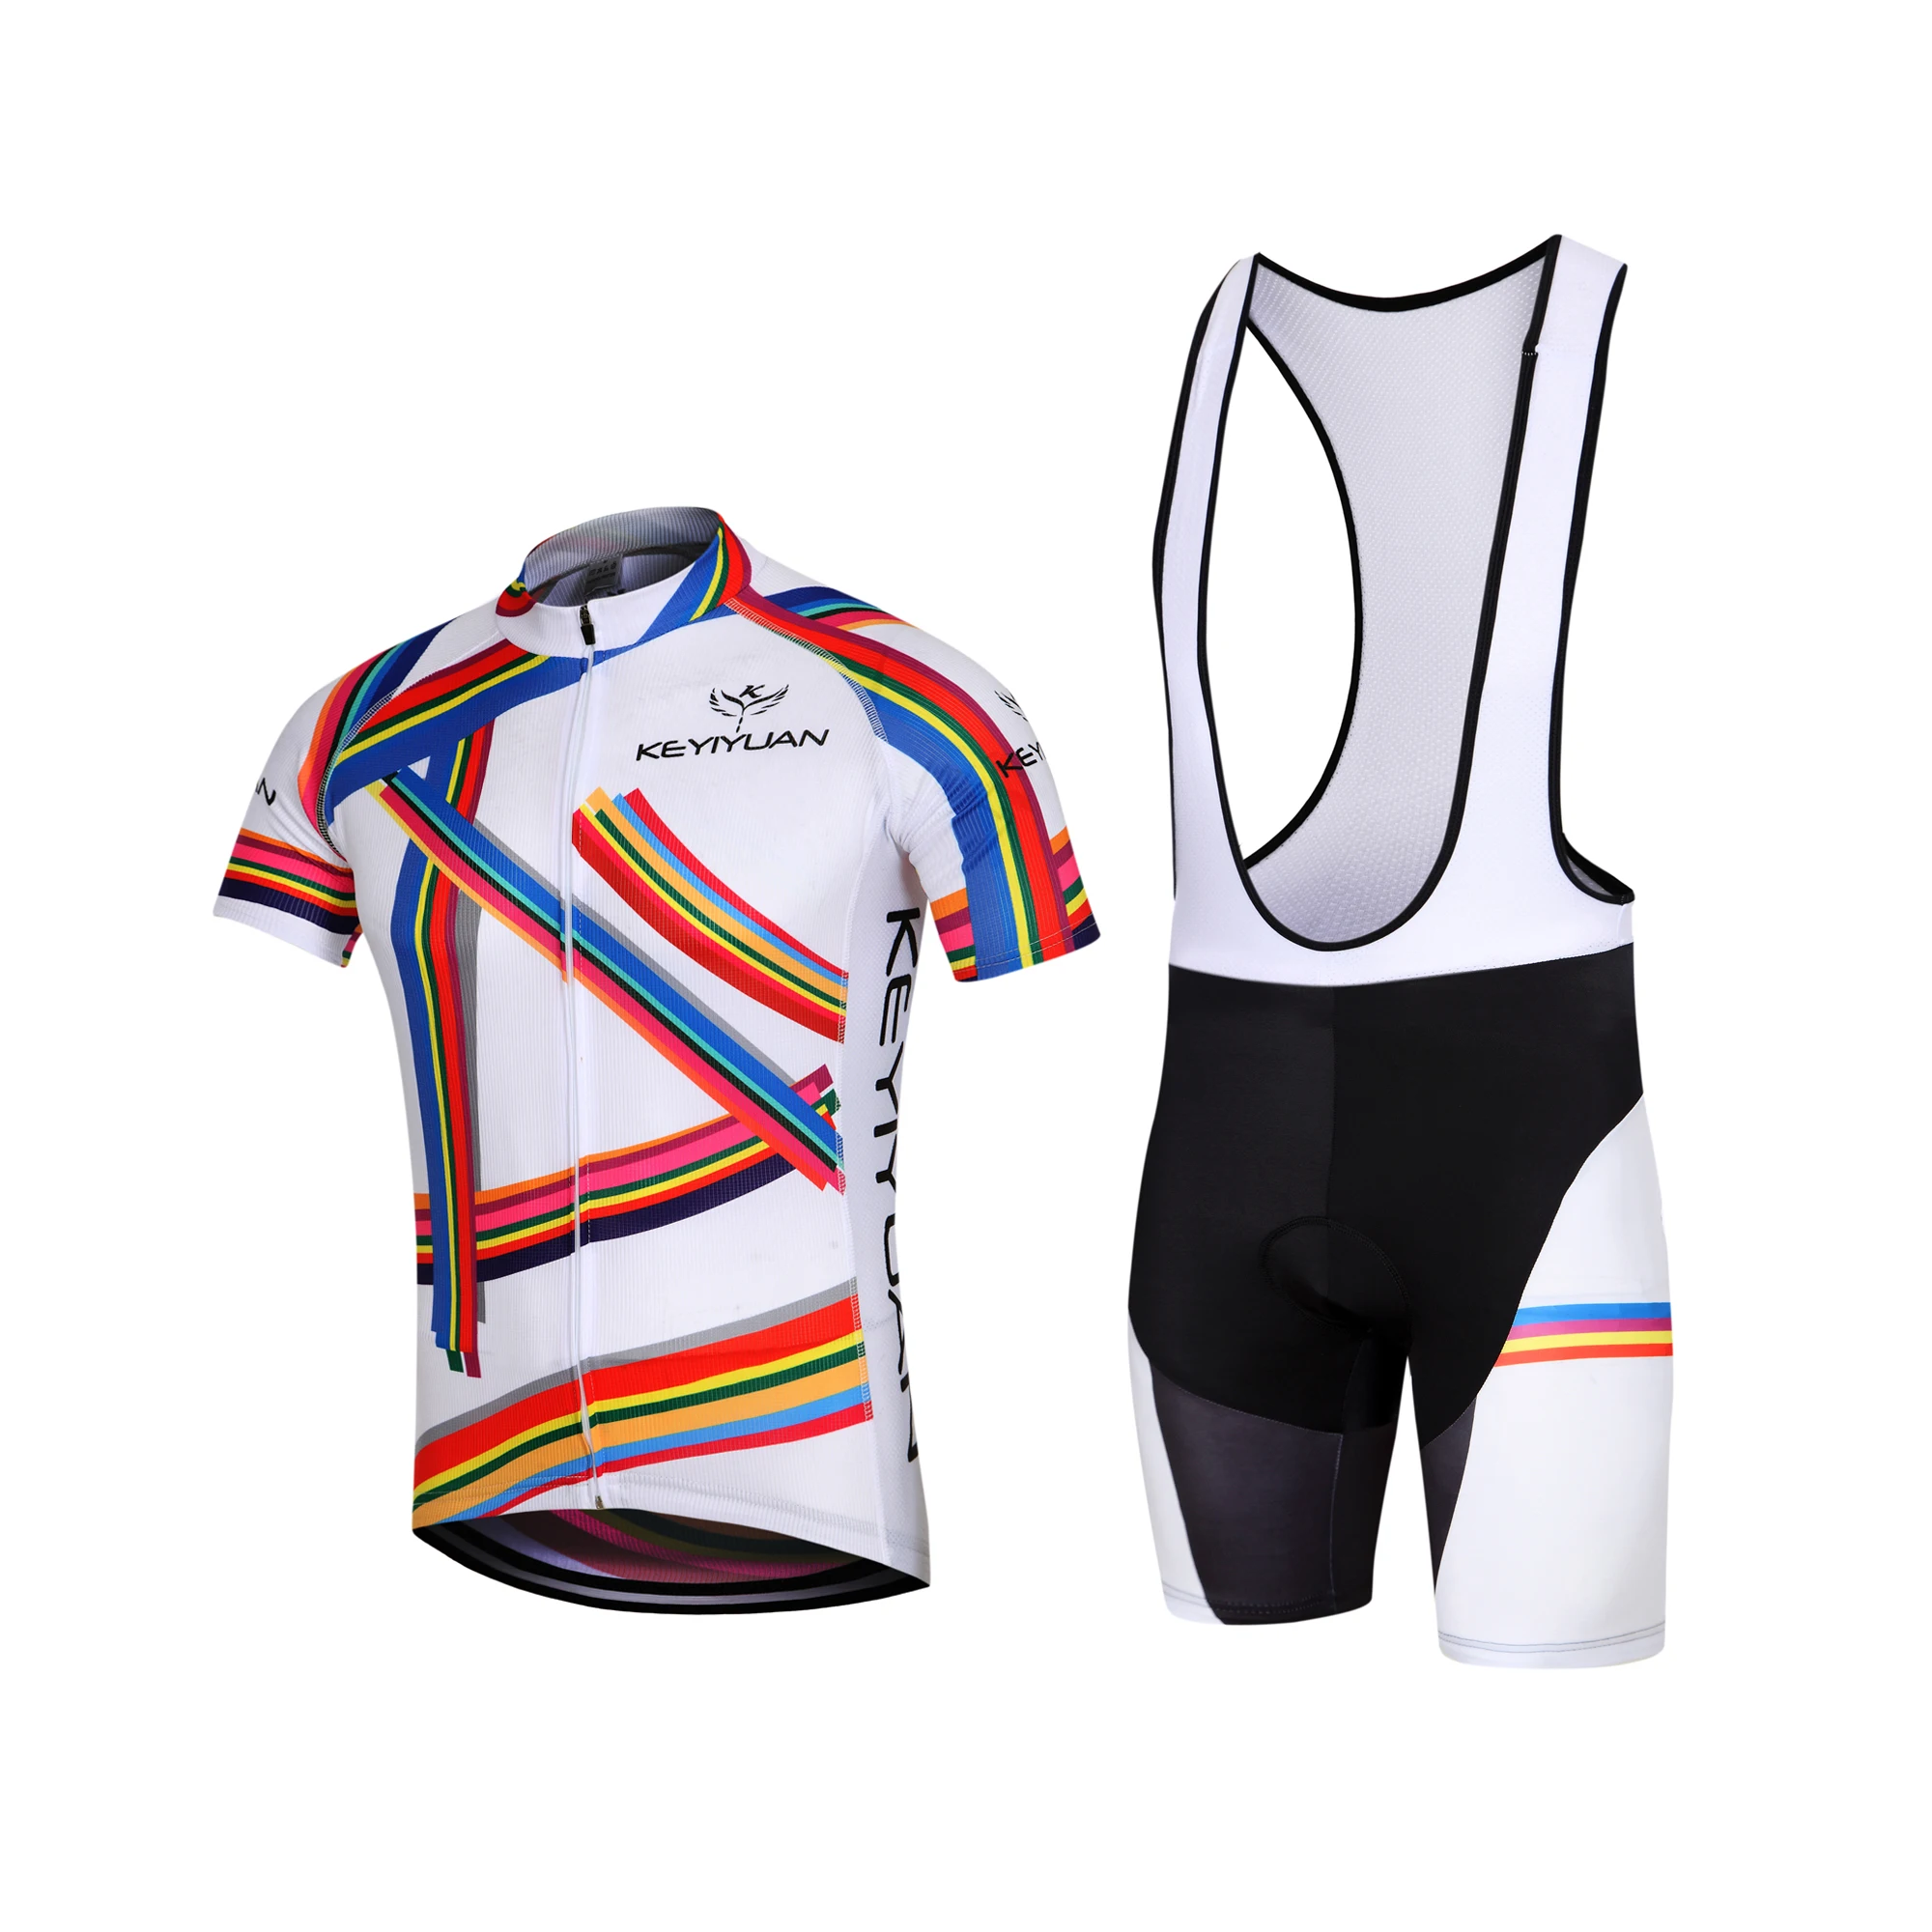 

KEYIYUAN New Summer Cycling Jersey Set Men MTB Cycle Clothes Suit Outdoor Bicycle Clothing Mallot Ciclismo Hombre Verano